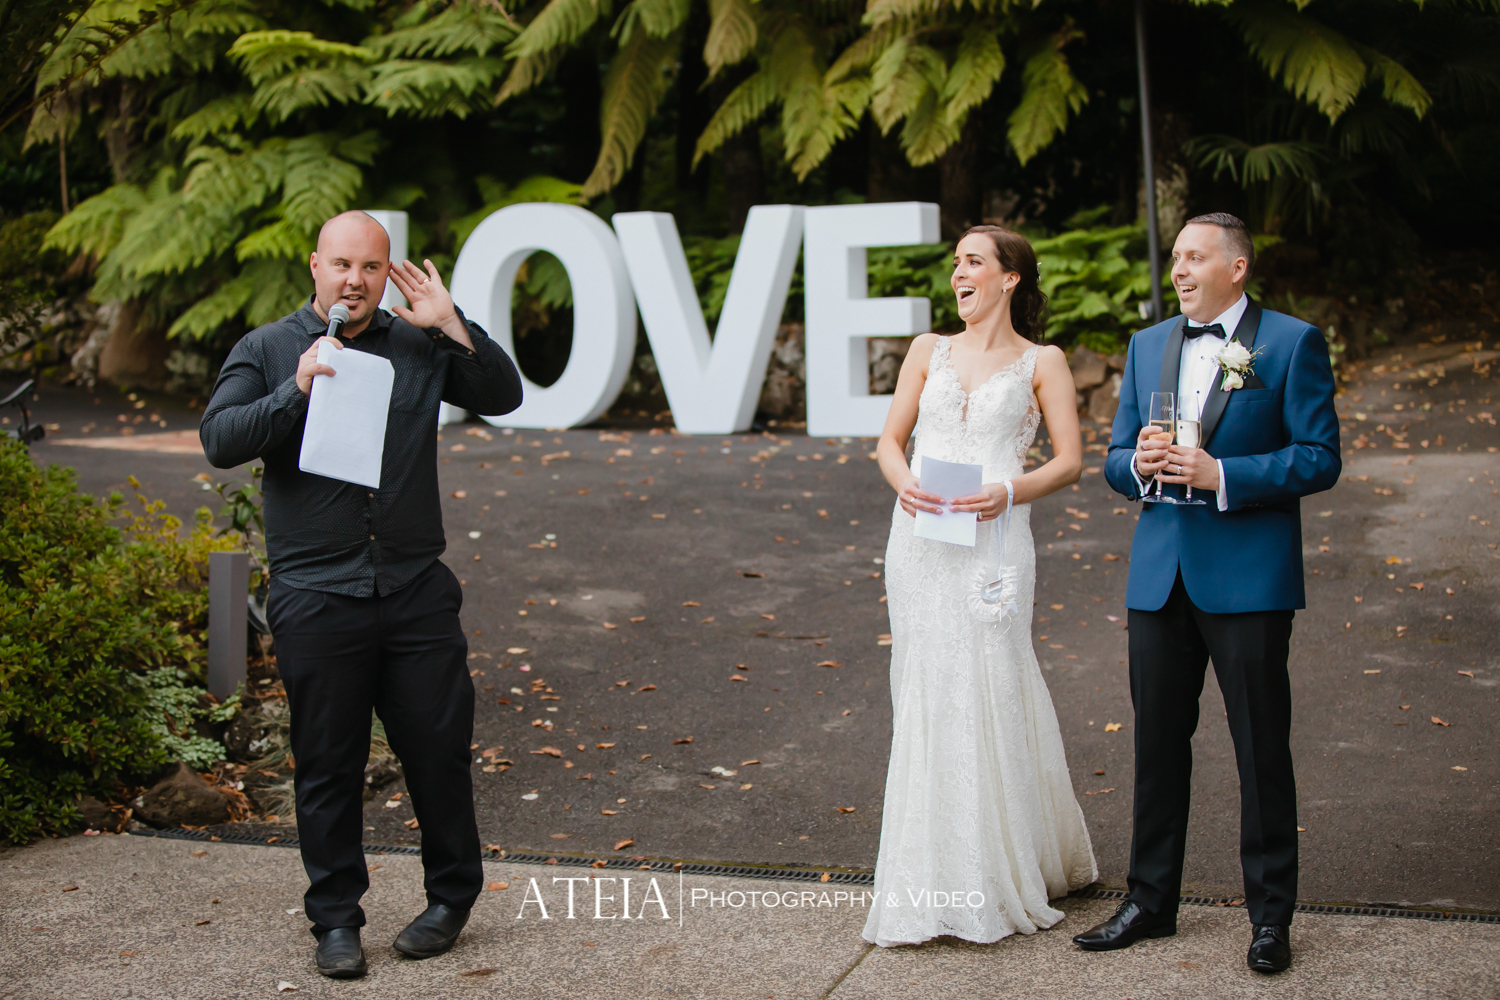 , Nathania Springs Wedding Photography Melbourne by ATEIA Photography &#038; Video